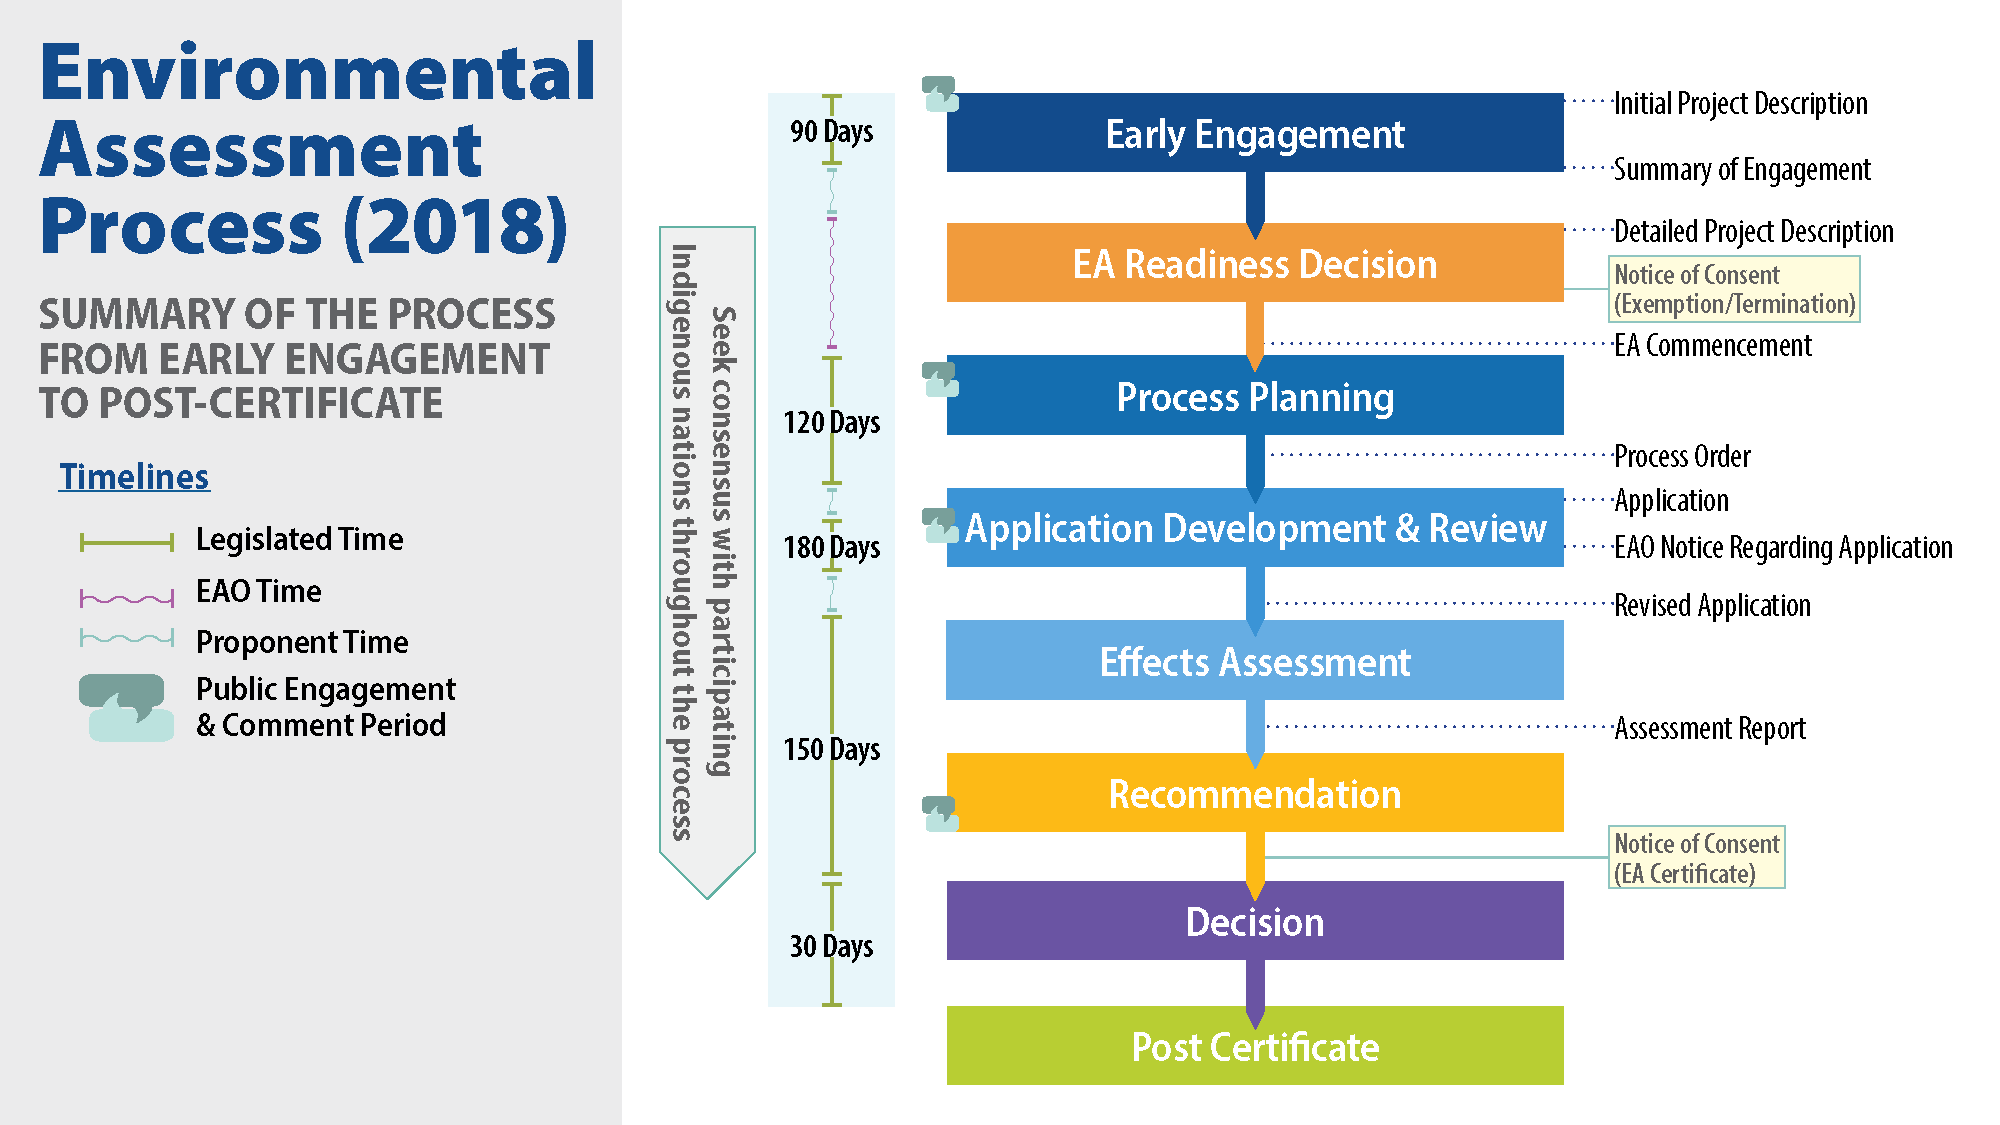 Environmental Assessment Office - Process for Environmental Assessments based on new 2018 Act